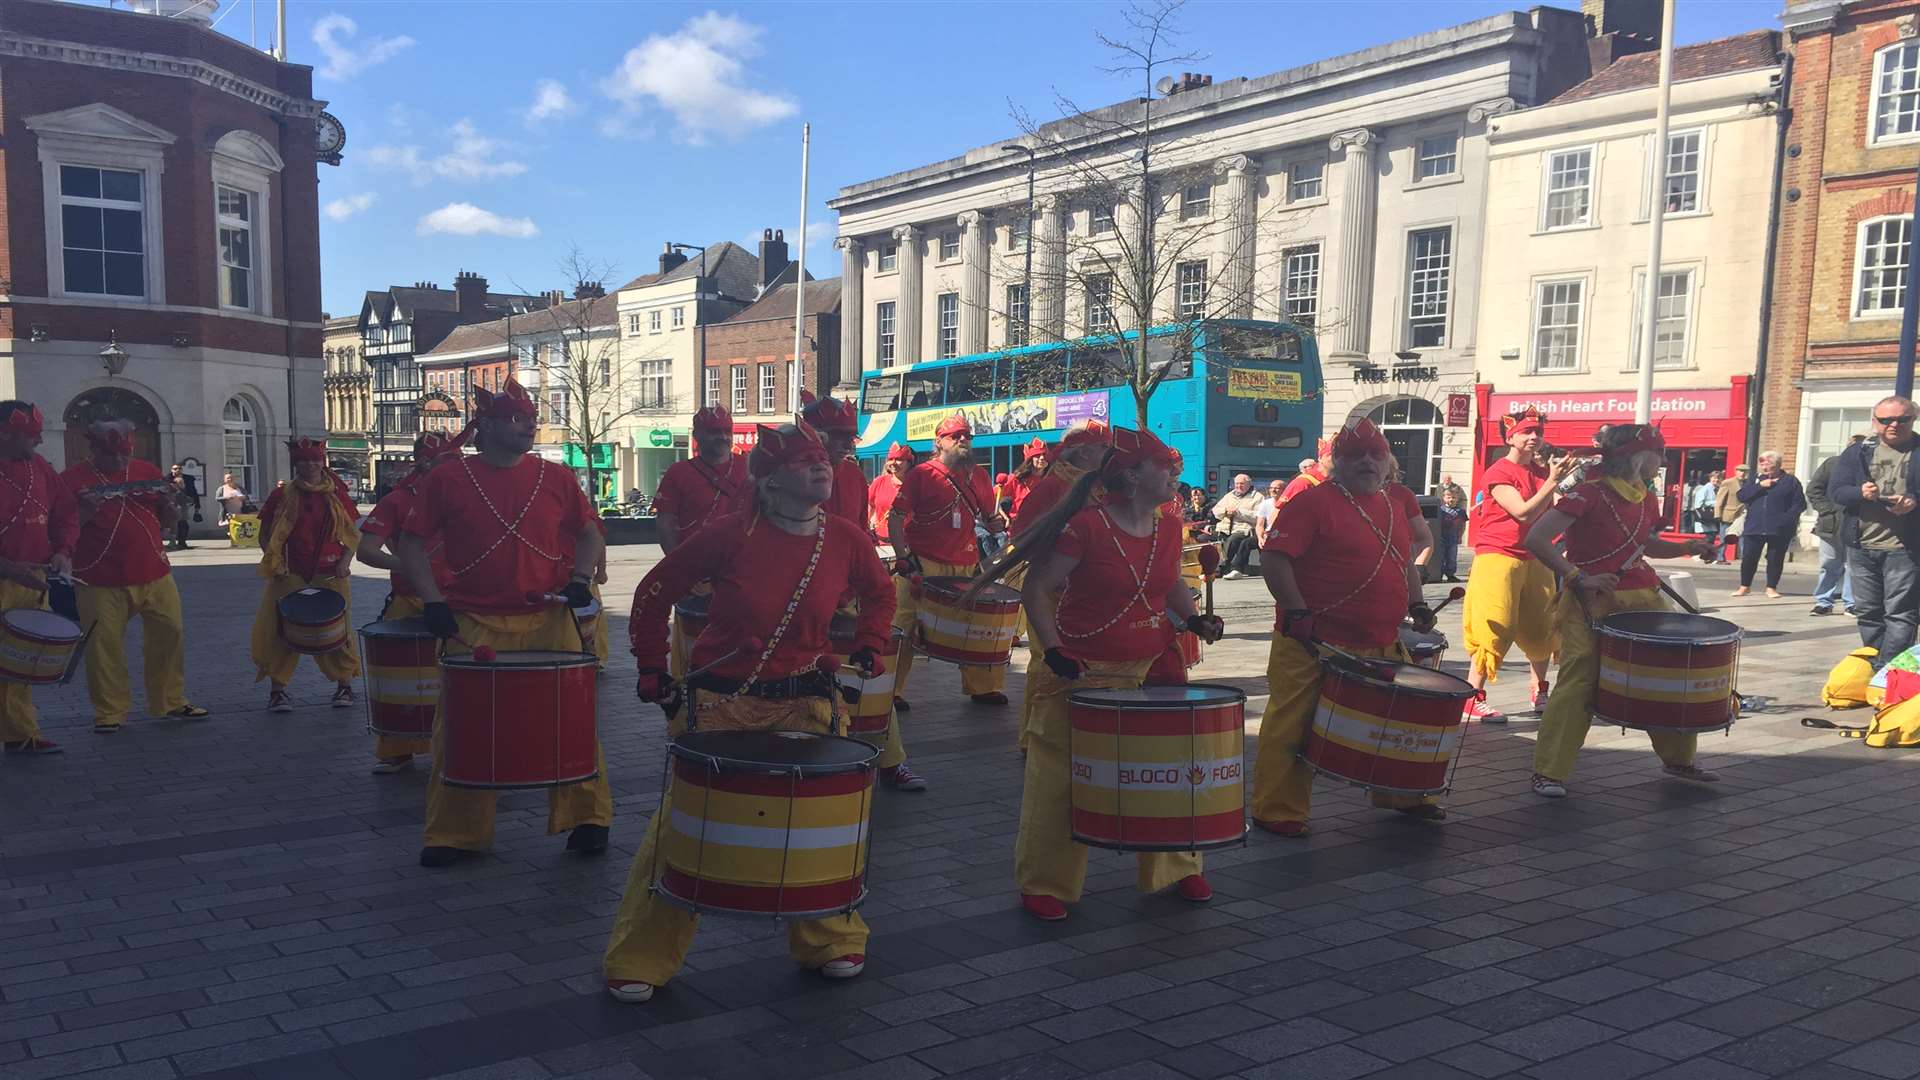 Bloco Fogo entertained crowds in Maidstone today.